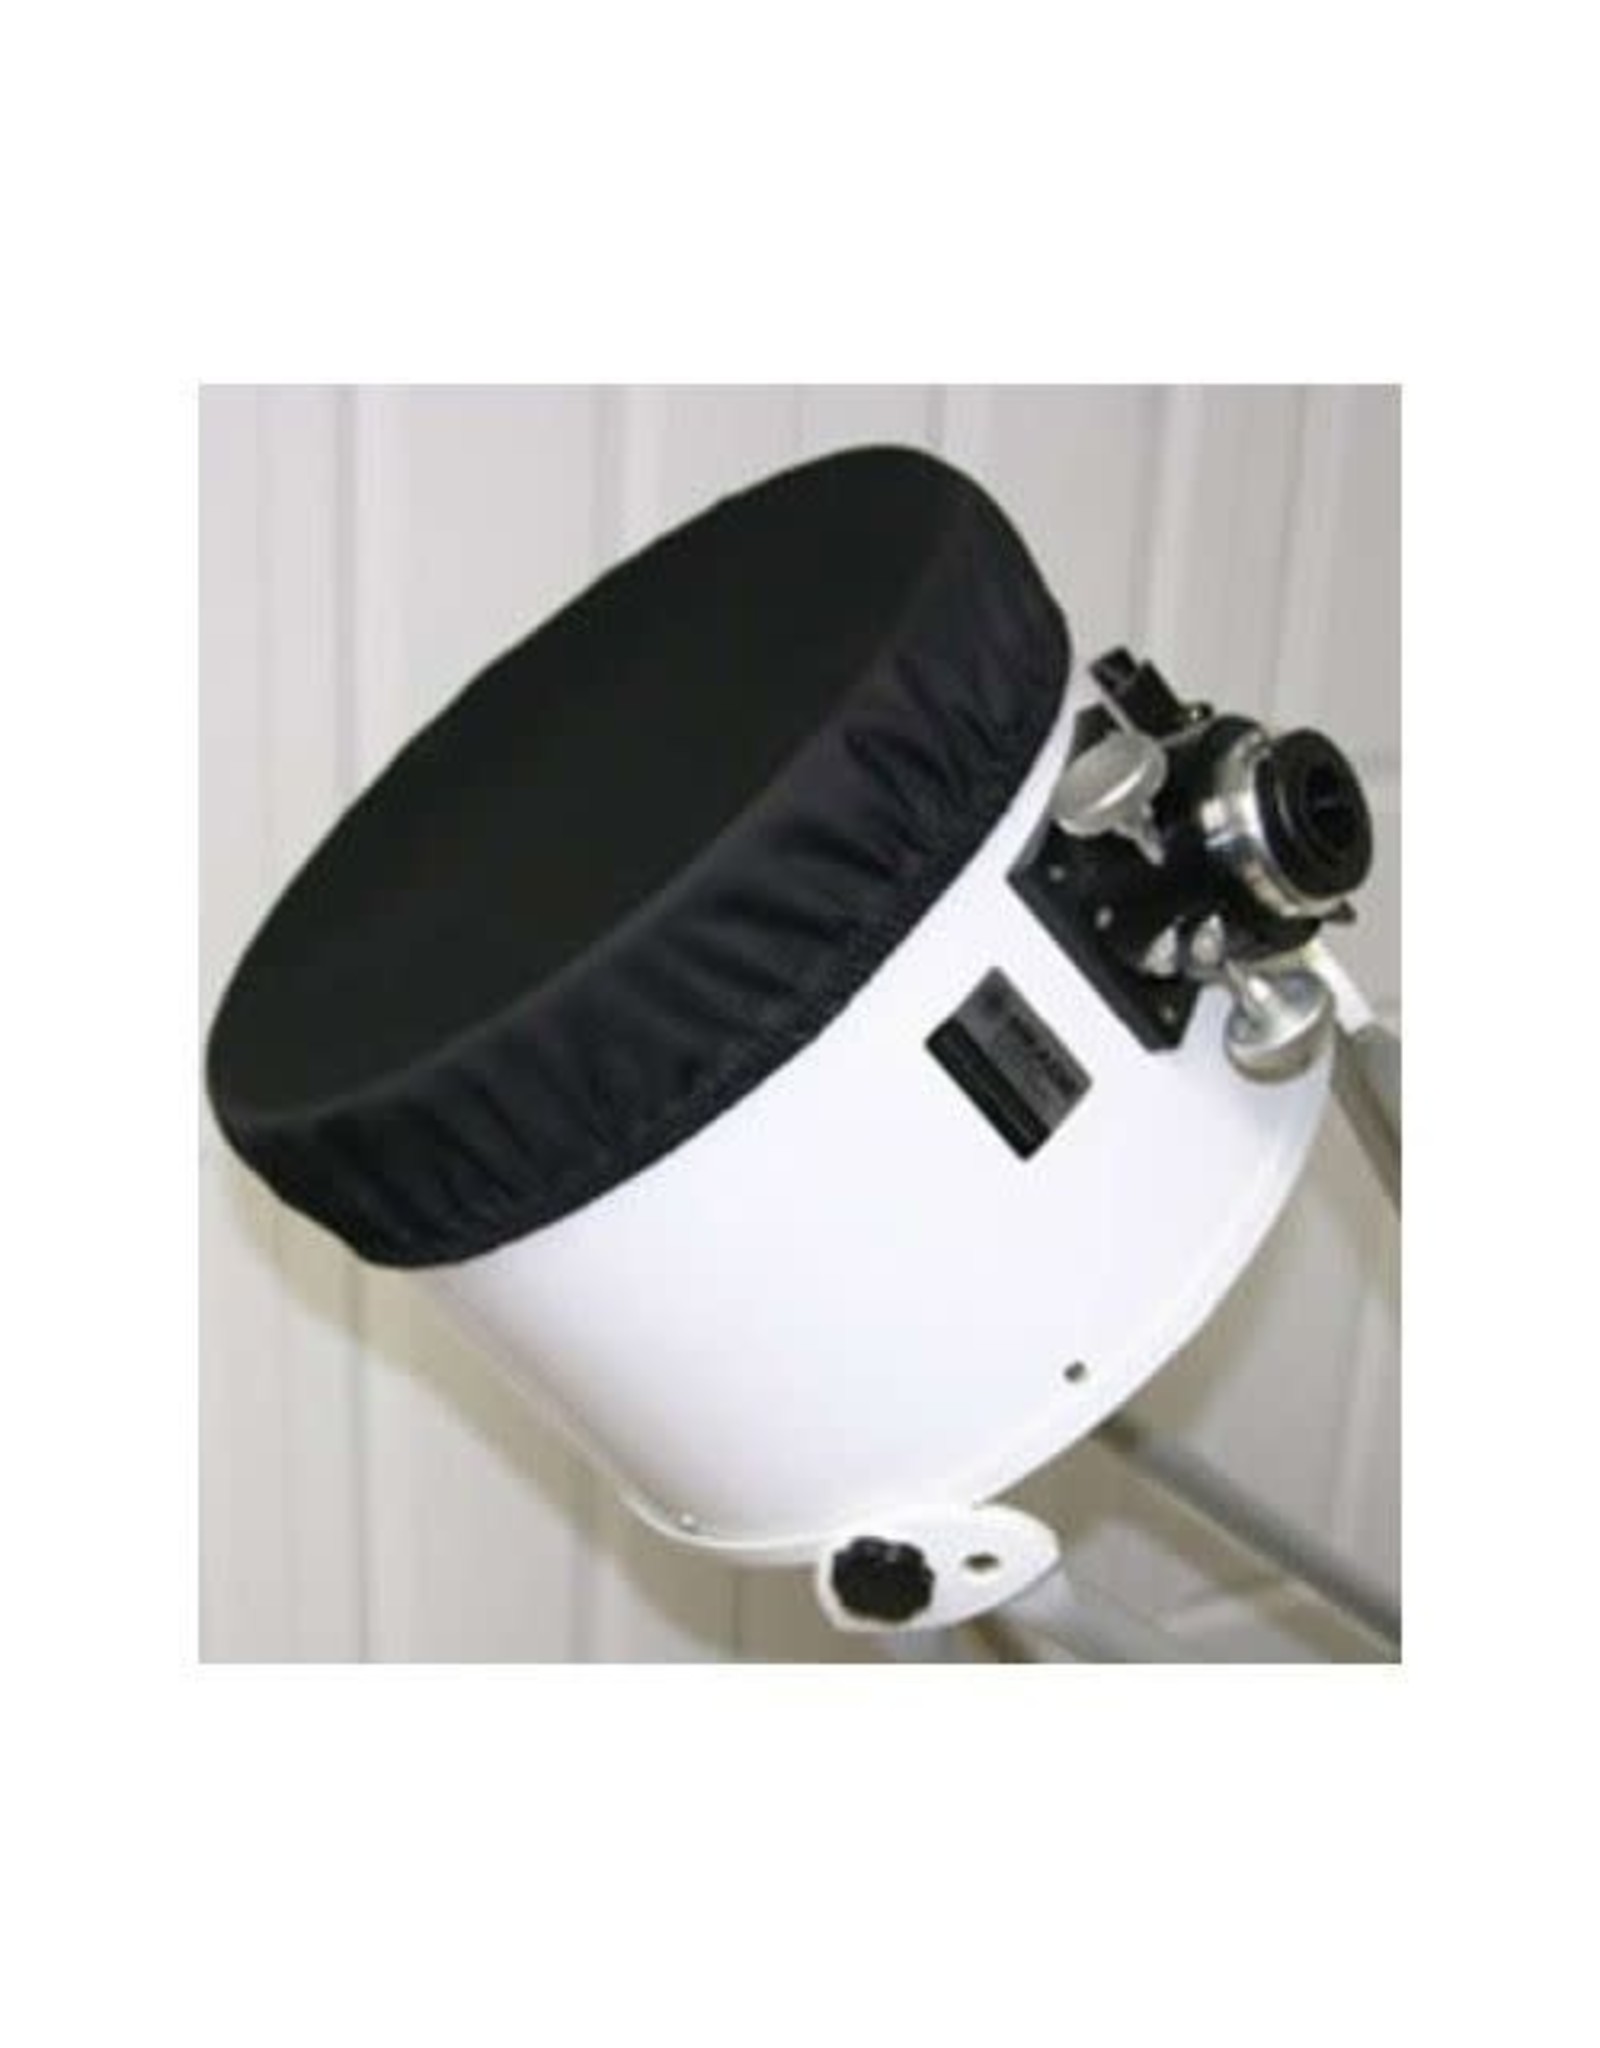 Astrozap Astrozap Dust Cover for 6" Telescopes or Dew Shields